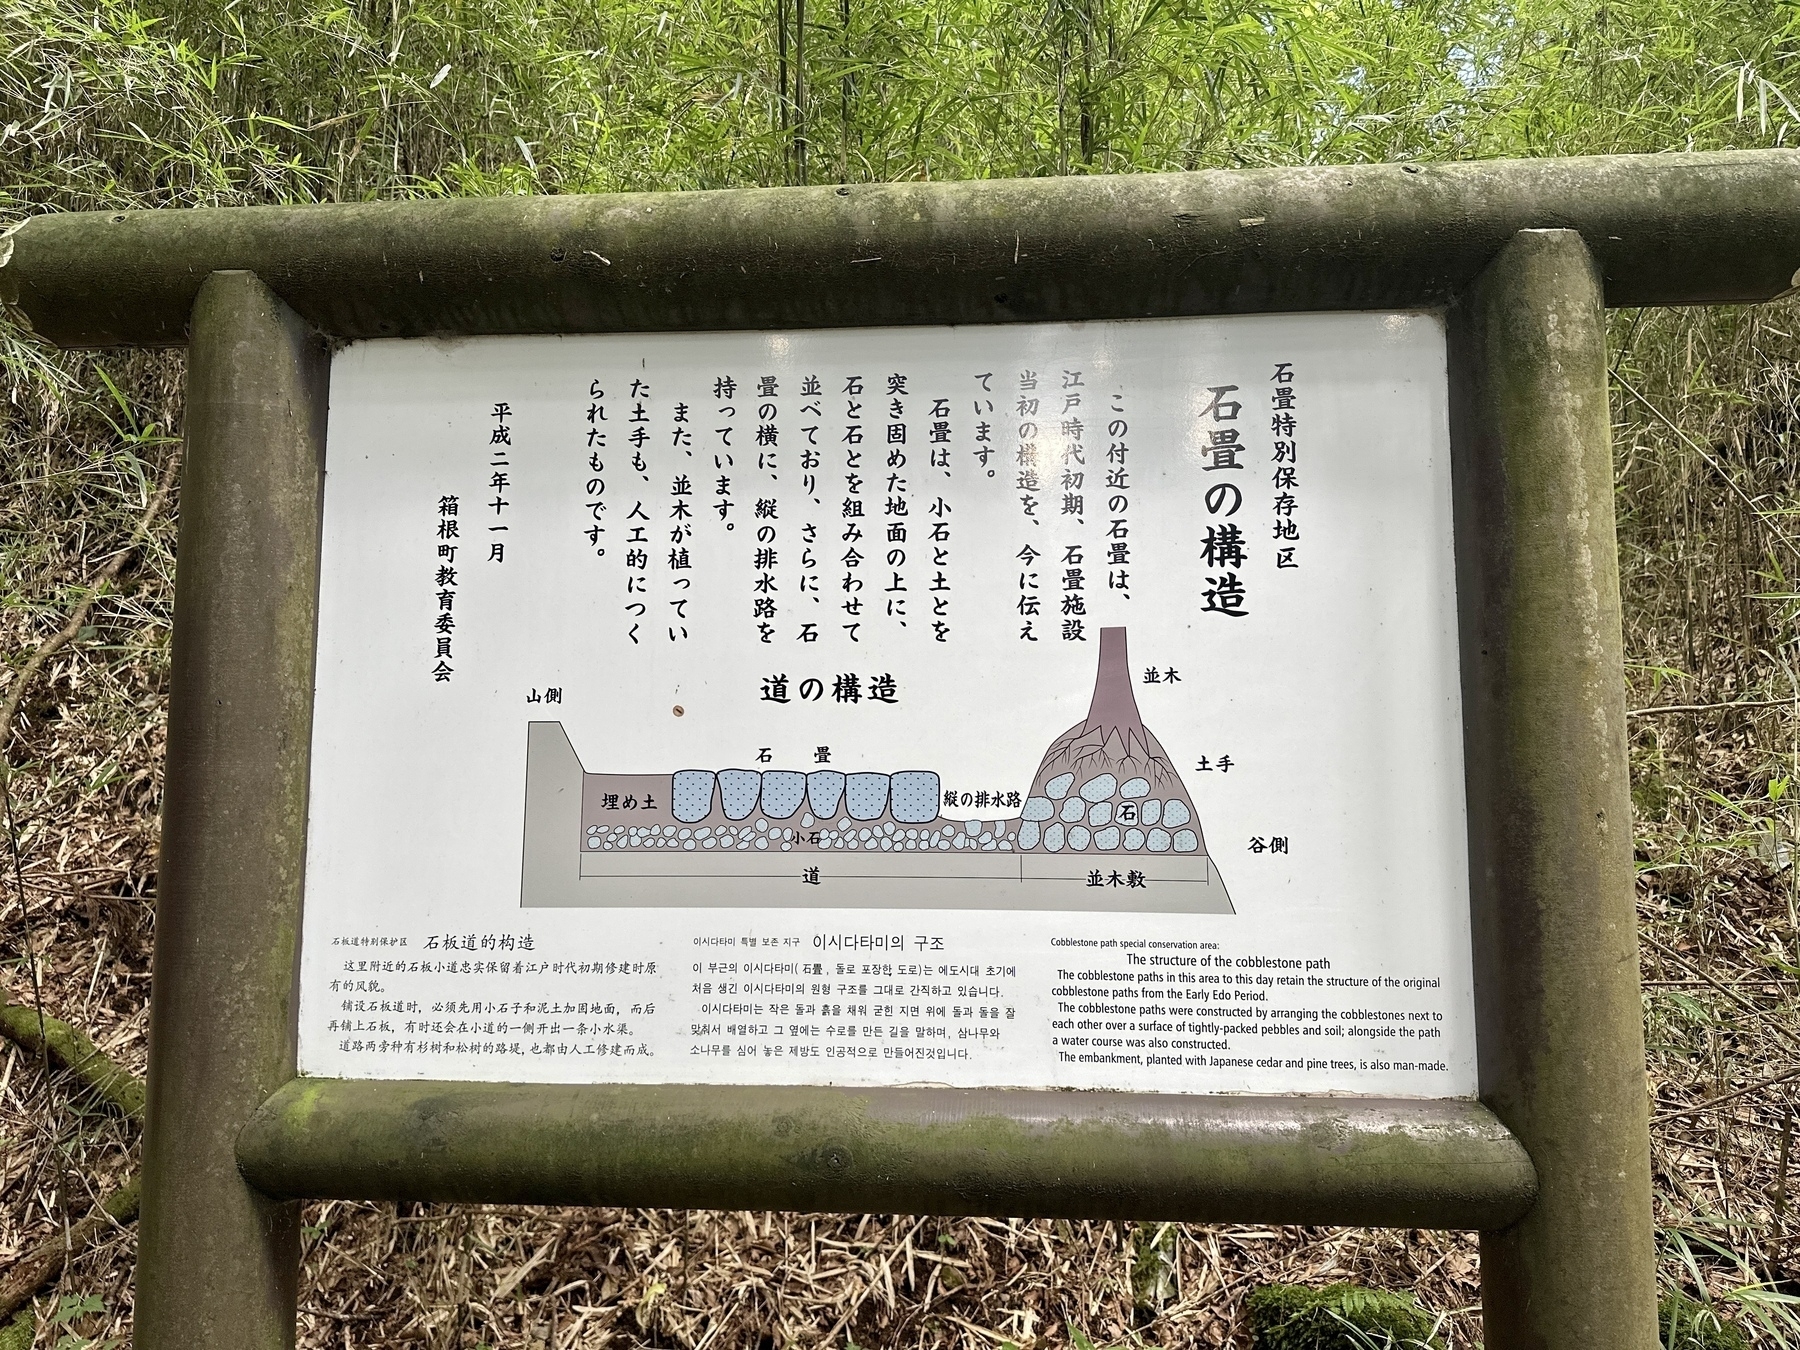 Photo of billboard showing how to build cobblestone roads of the old Tokaido